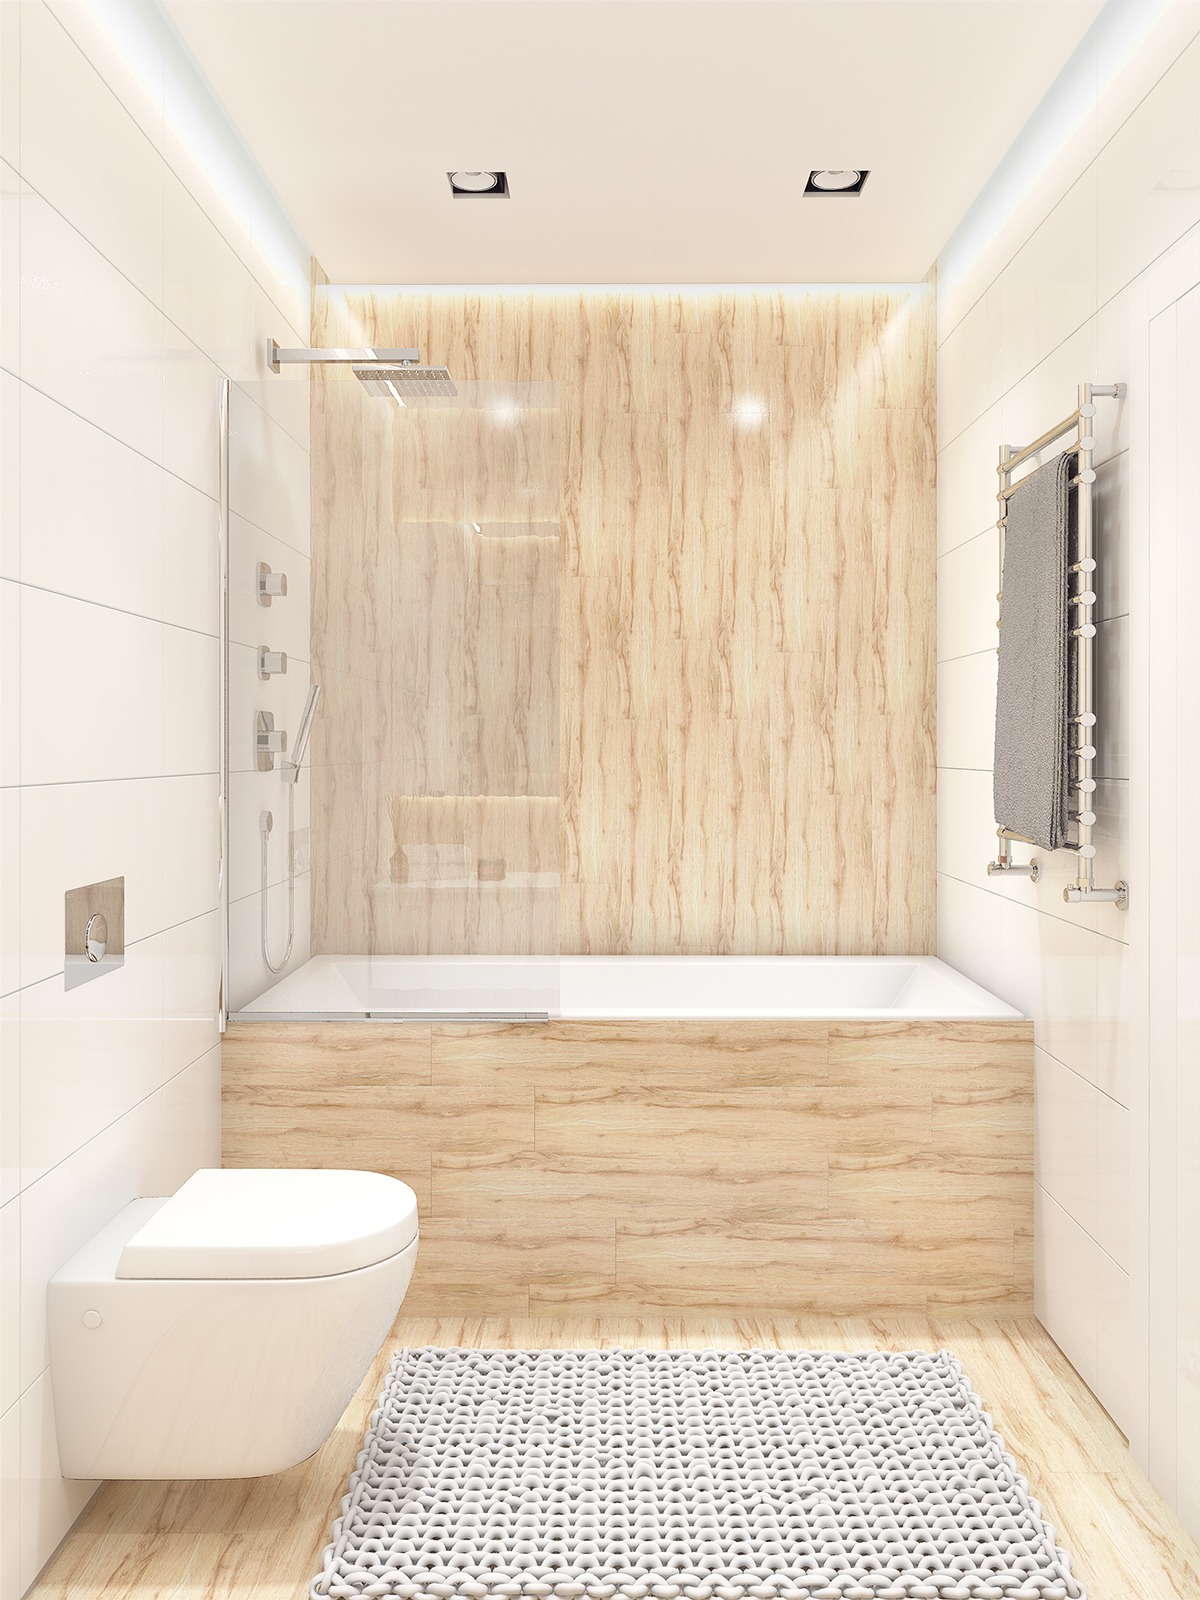 White wood backsplash "width =" 1200 "height =" 1600 "srcset =" https://mileray.com/wp-content/uploads/2020/05/1588515634_947_Small-Minimalist-Bathroom-Designs-Decorated-With-Variety-of-Modern-Pattern.jpg 1200w, https://mileray.com /wp-content/uploads/2016/10/Juliya-Butova-225x300.jpg 225w, https://mileray.com/wp-content/uploads/2016/10/Juliya-Butova-768x1024.jpg 768w, https: / /mileray.com/wp-content/uploads/2016/10/Juliya-Butova-696x928.jpg 696w, https://mileray.com/wp-content/uploads/2016/10/Juliya-Butova-1068x1424.jpg 1068w , https://mileray.com/wp-content/uploads/2016/10/Juliya-Butova-315x420.jpg 315w "Sizes =" (maximum width: 1200px) 100vw, 1200px